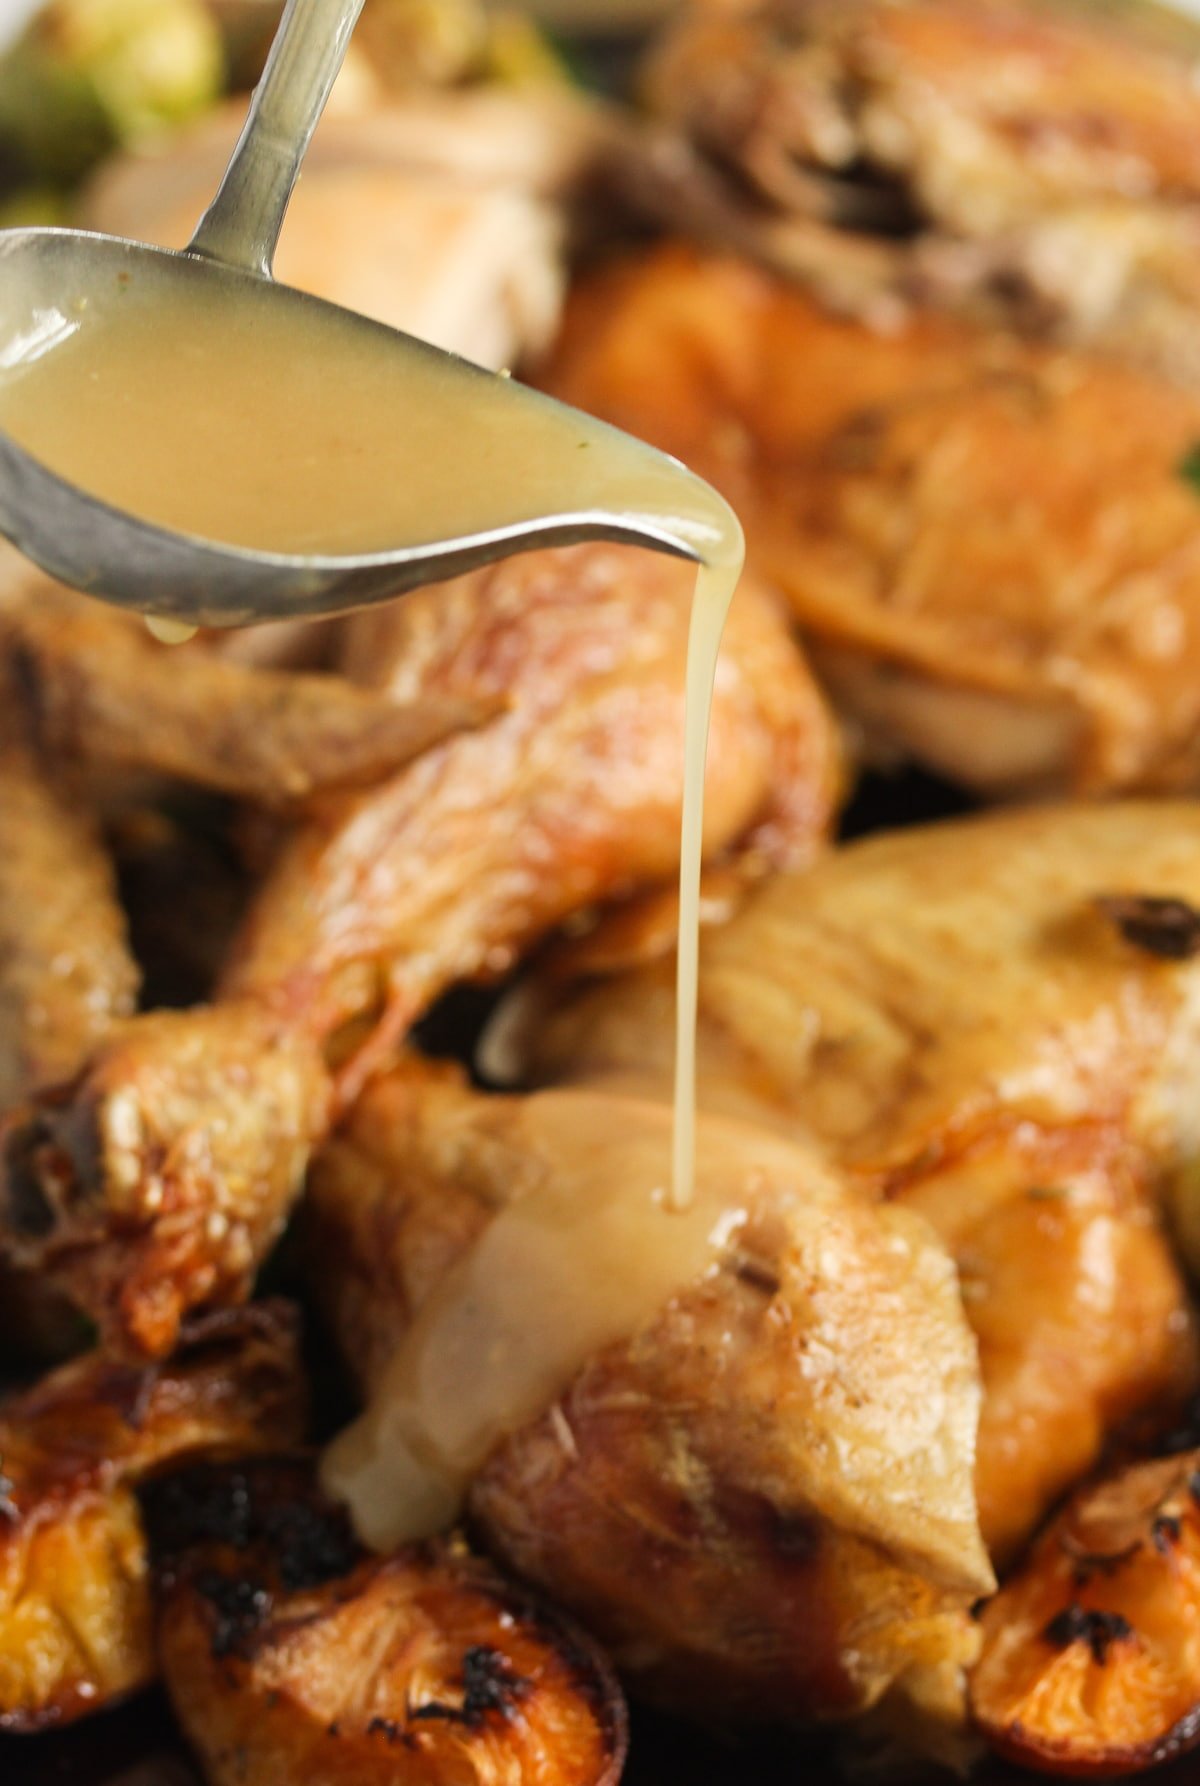 pouring gravy on a platter with roasted chicken pieces.